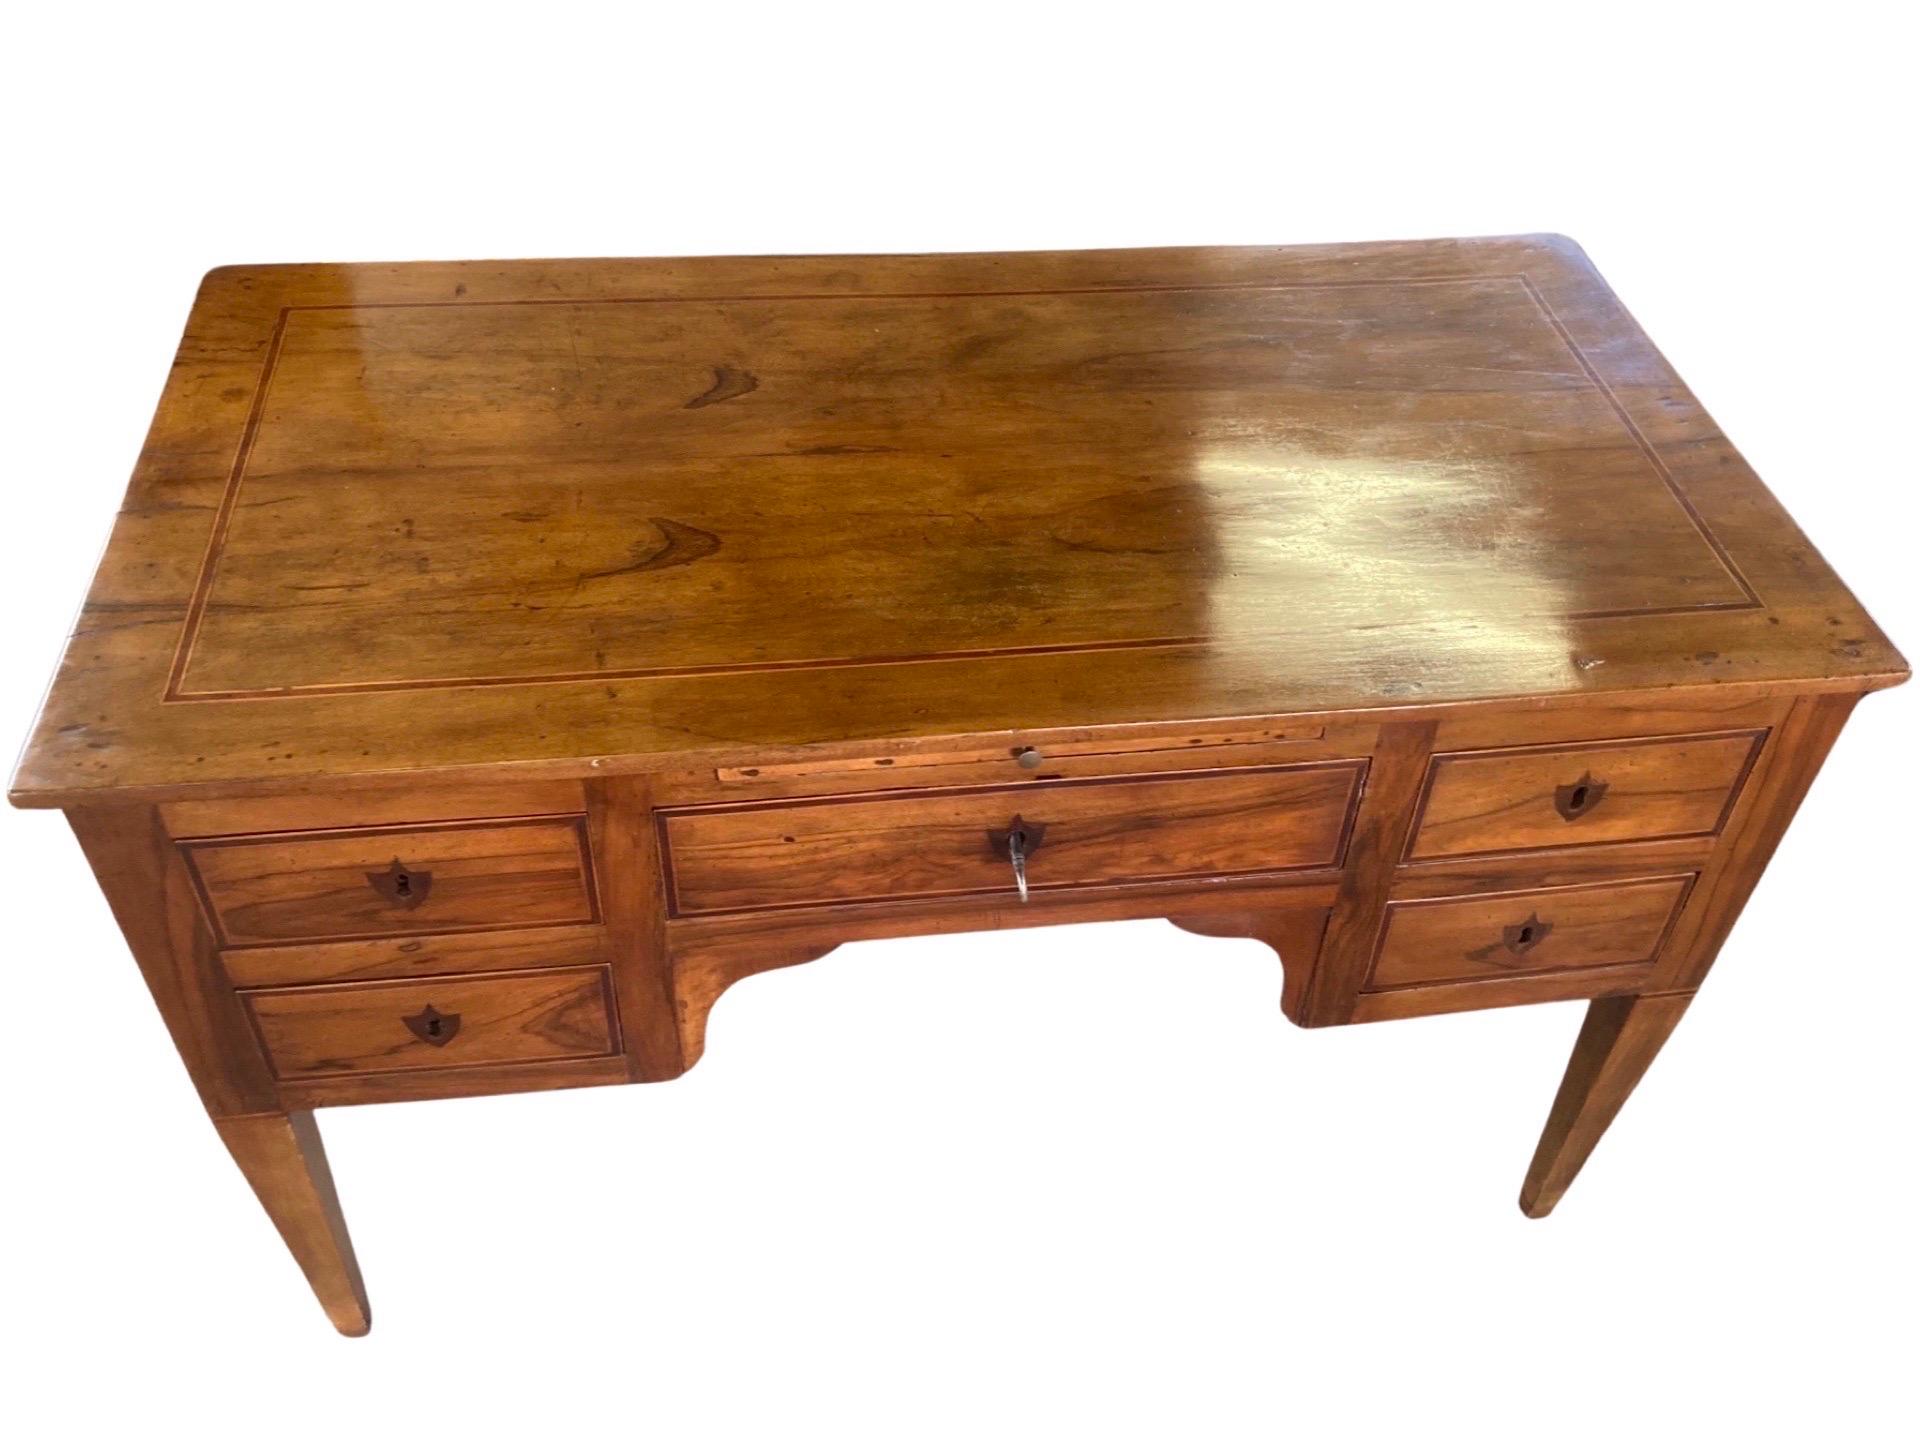 Stunning writing desk hand-made in Italy in the mid 1700s using walnut. This really is the mother of all Italian scrivanie (writing desks): its lines, details and overall look make it a perfect piece for whoever is looking for a classical piece that